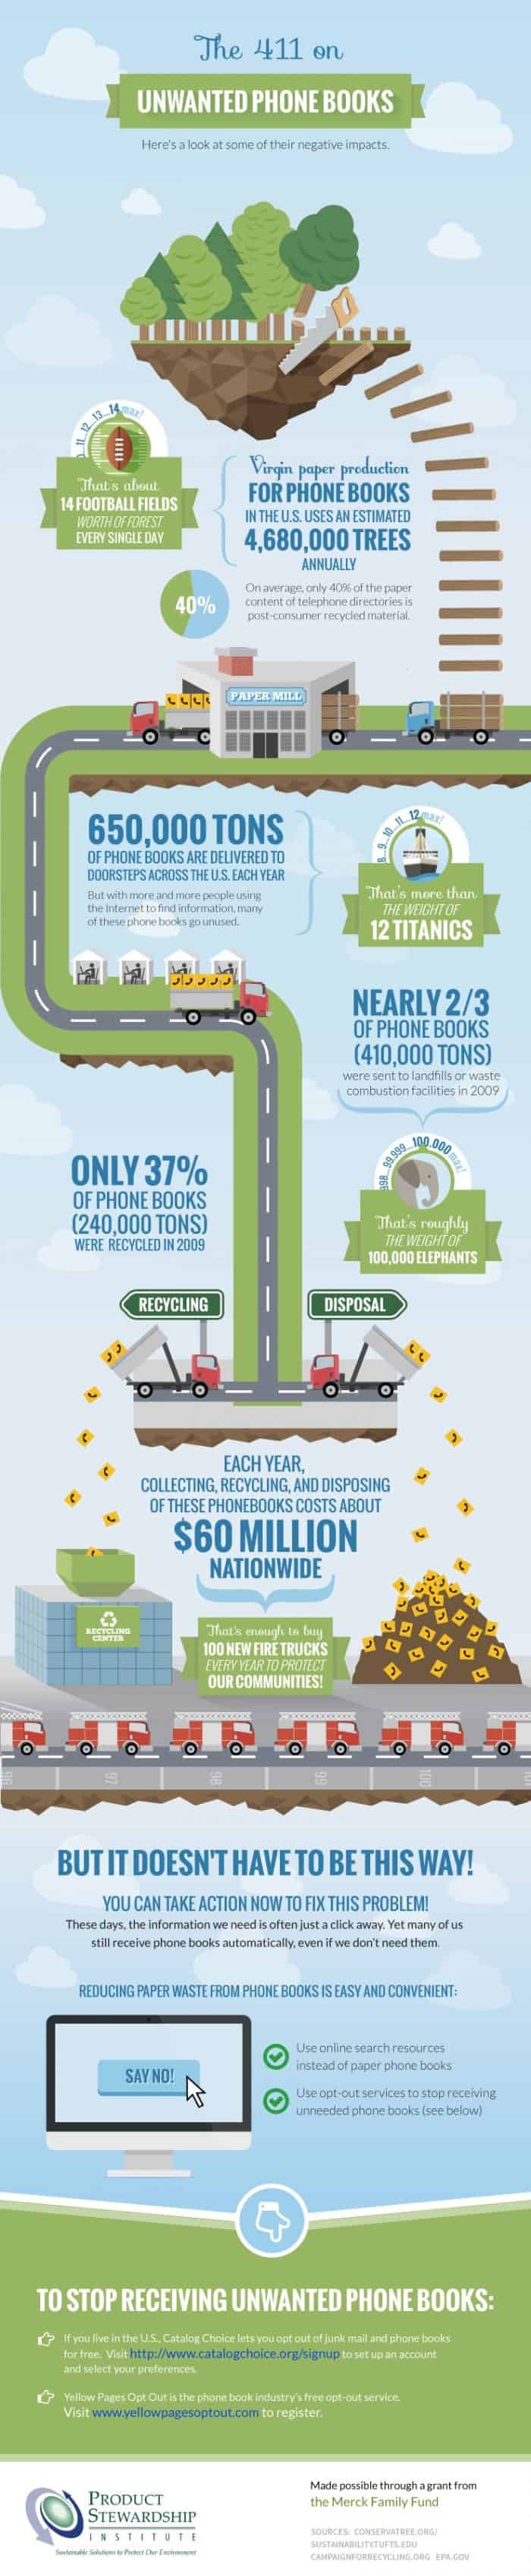 Consequences of Unwanted Phone Books Infographic